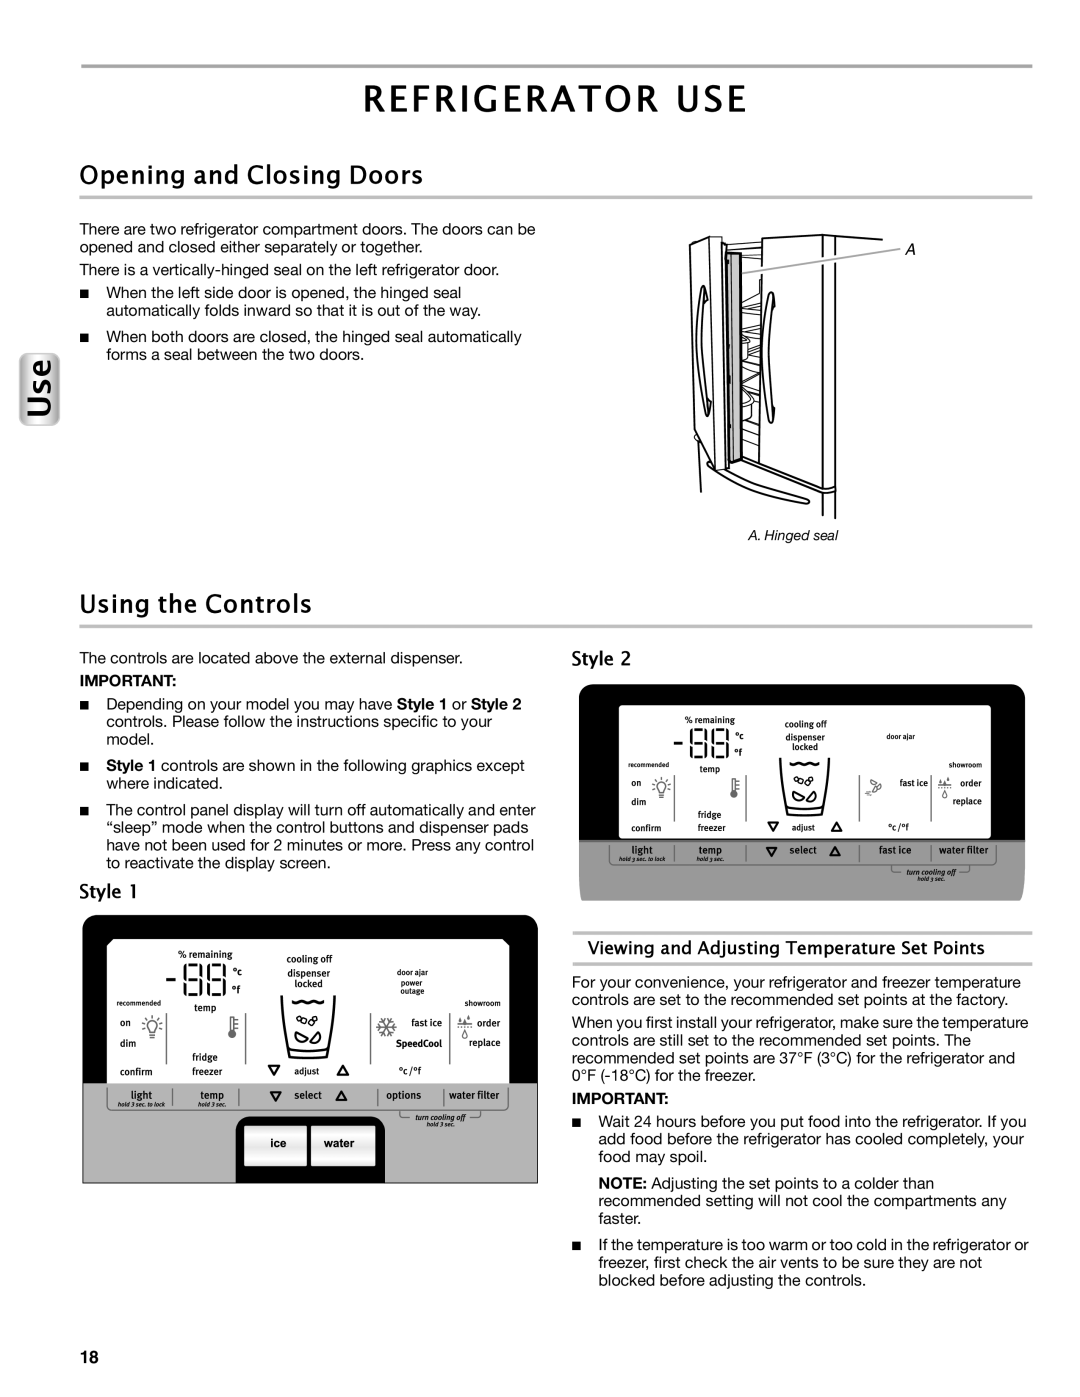 Maytag W10558104A manual Refrigerator Use, Opening and Closing Doors, Using the Controls, Style 